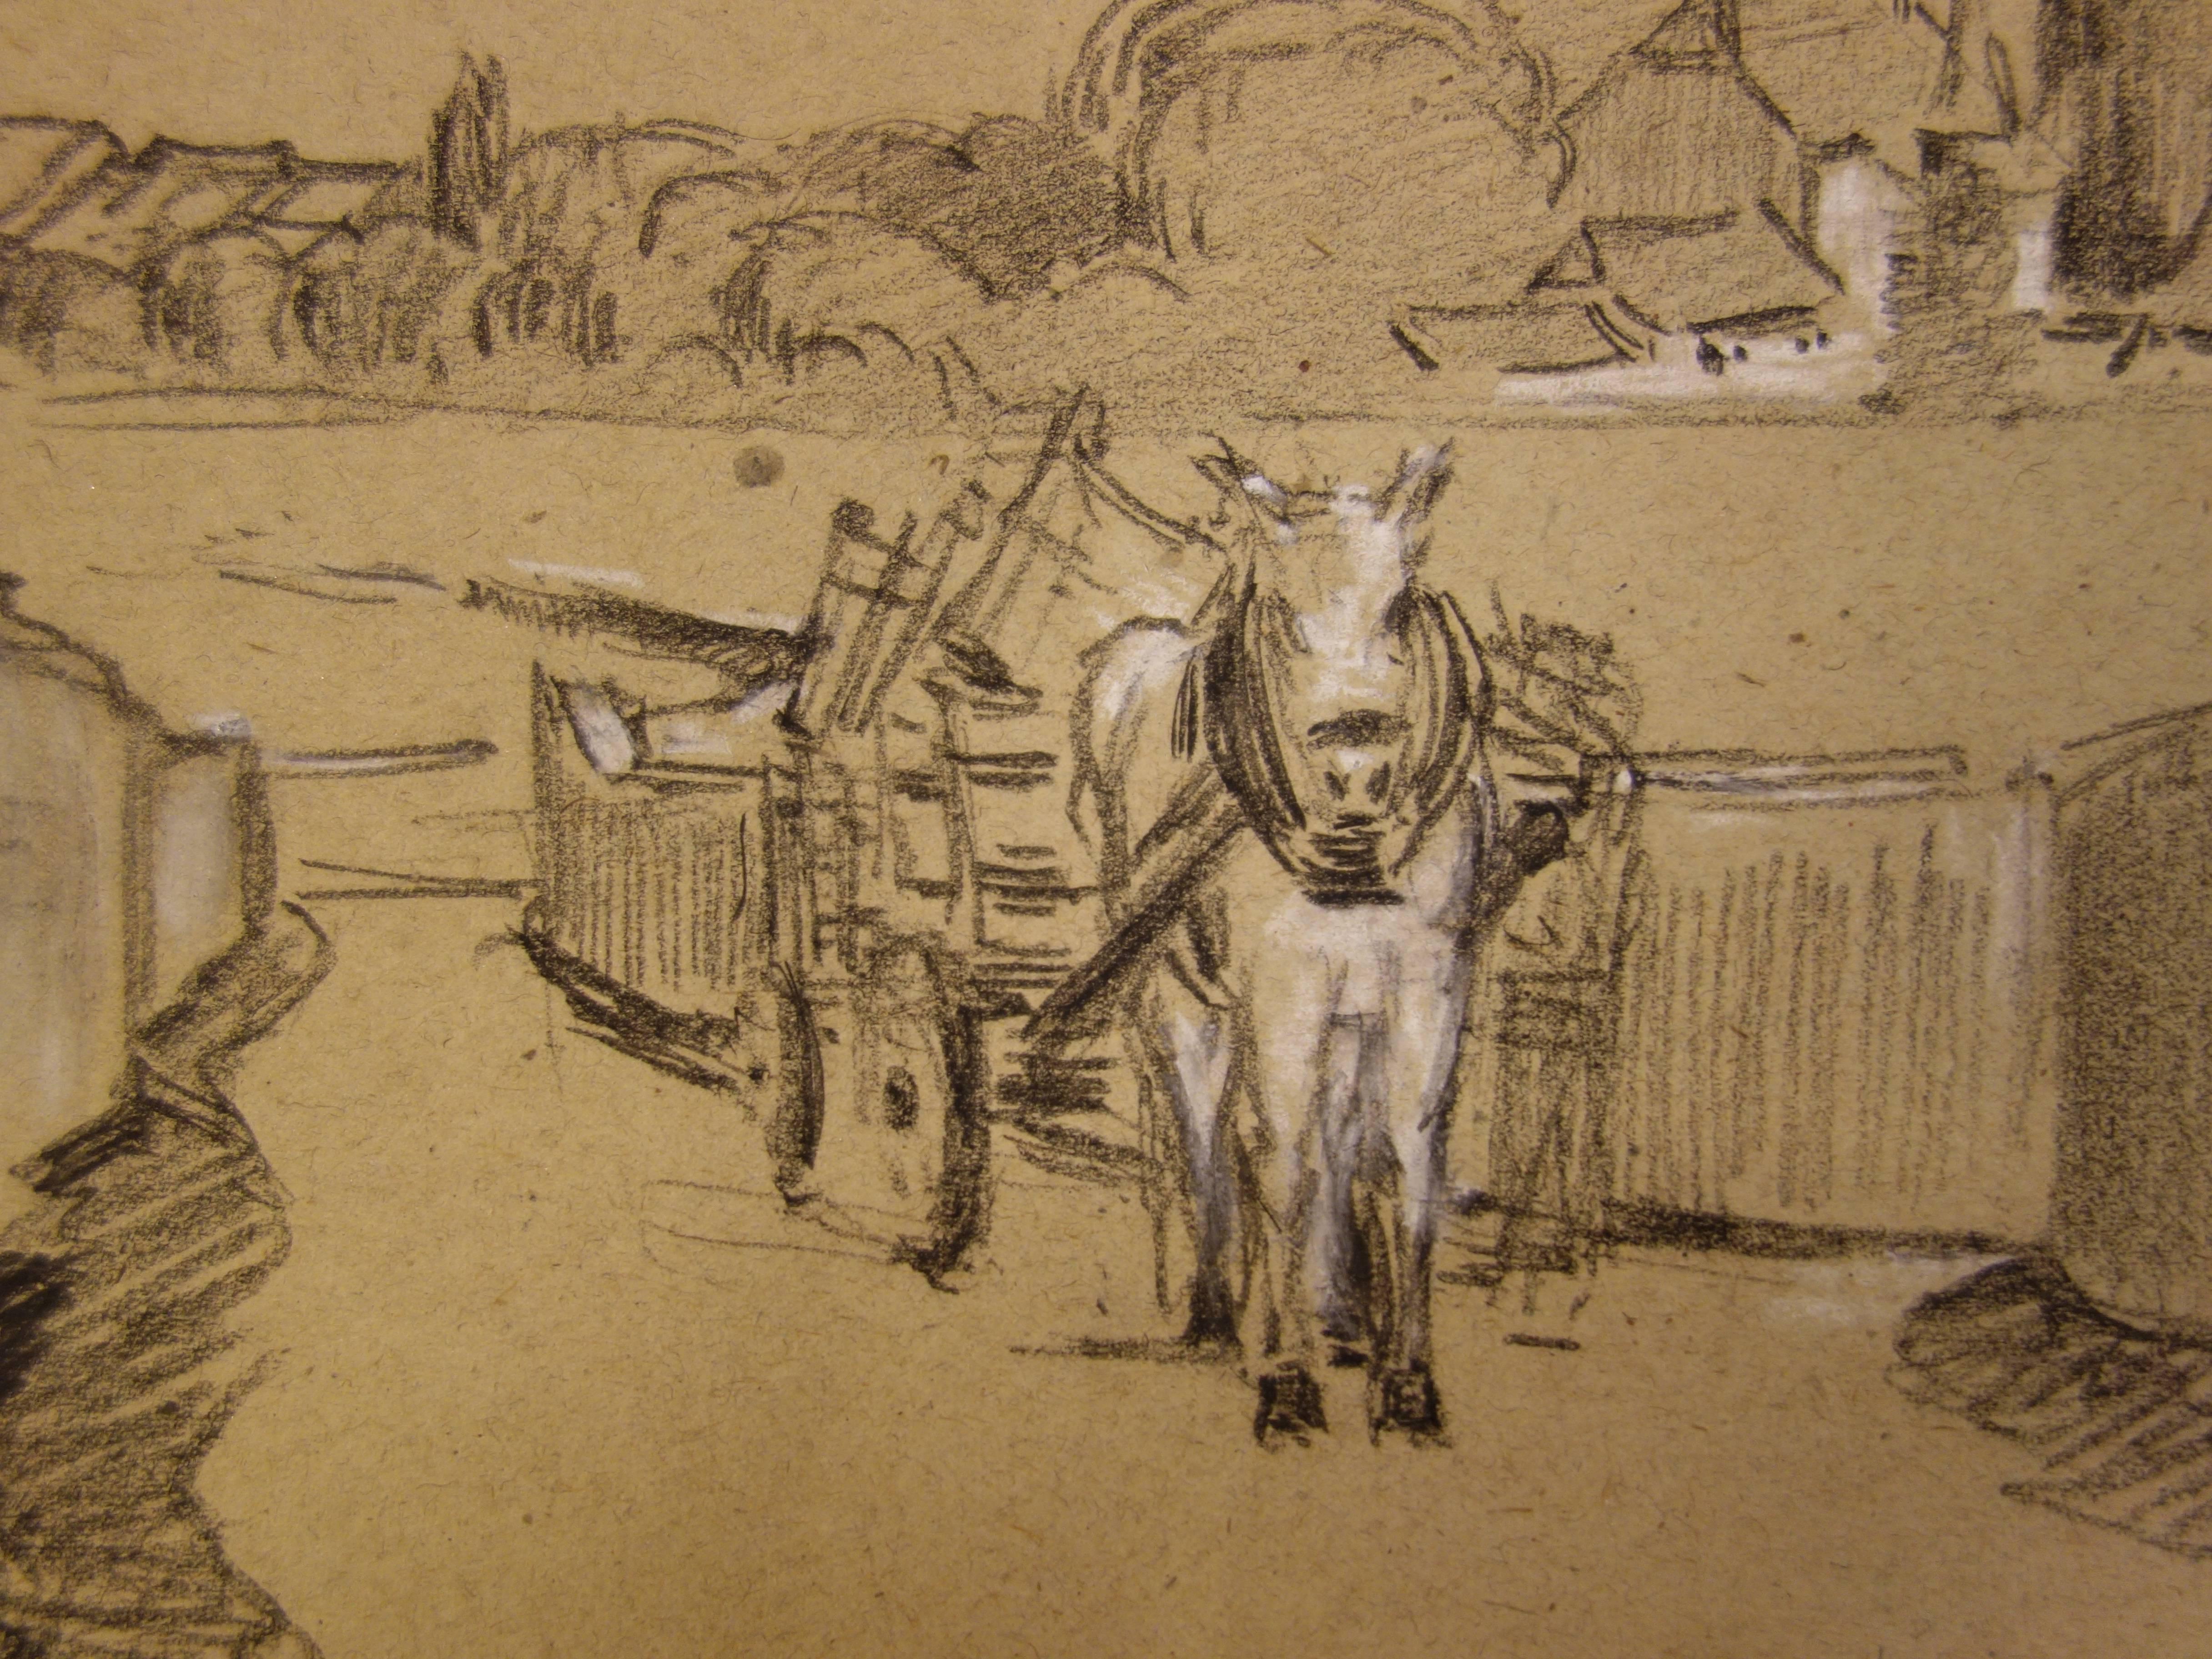 Carriage coming from a Small Village - Original Signed Charcoals Drawing  - Realist Art by Gustave Poetzsch